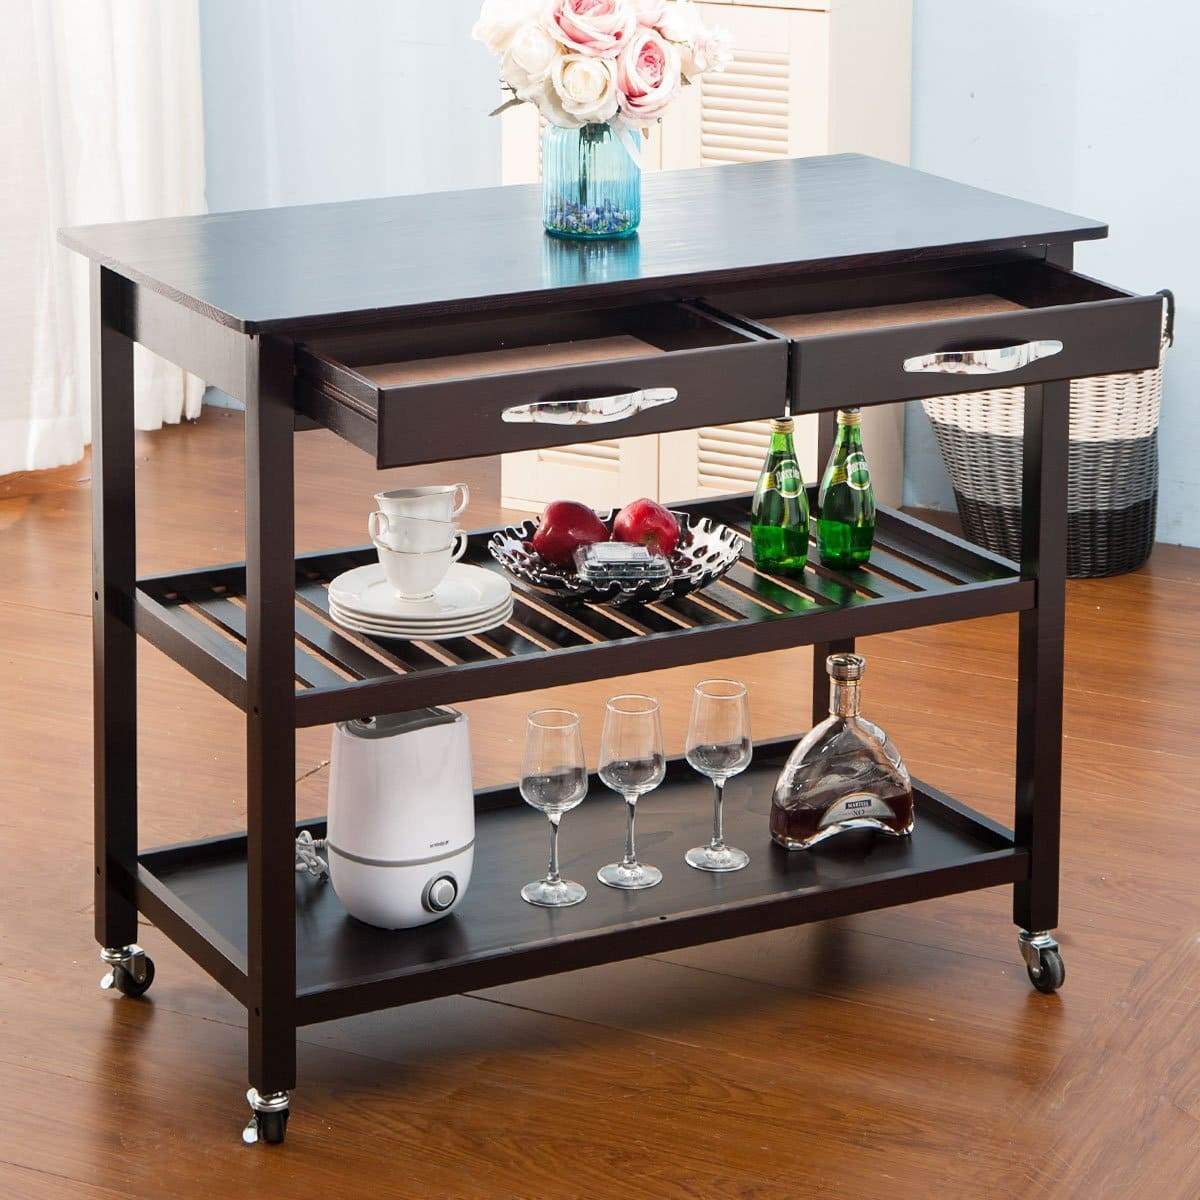 Kitchen lz leisure zone rolling kitchen island serving cart wood trolley w countertop 2 drawers 2 shelves and lockable wheels dark brown